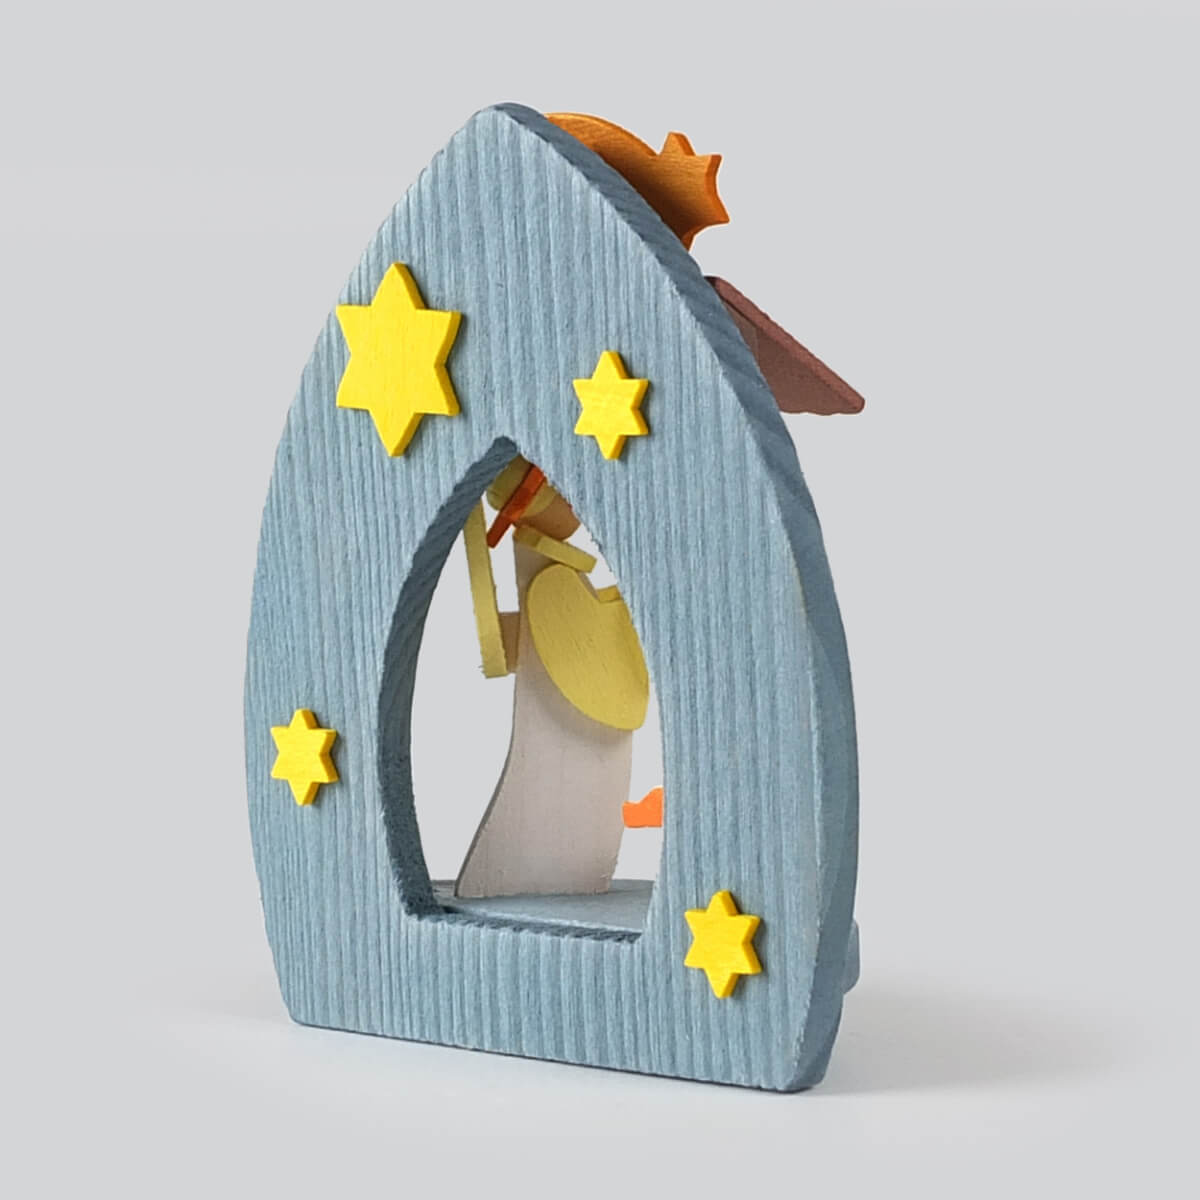 Manger 'The Nativity' Ornament with shepherd